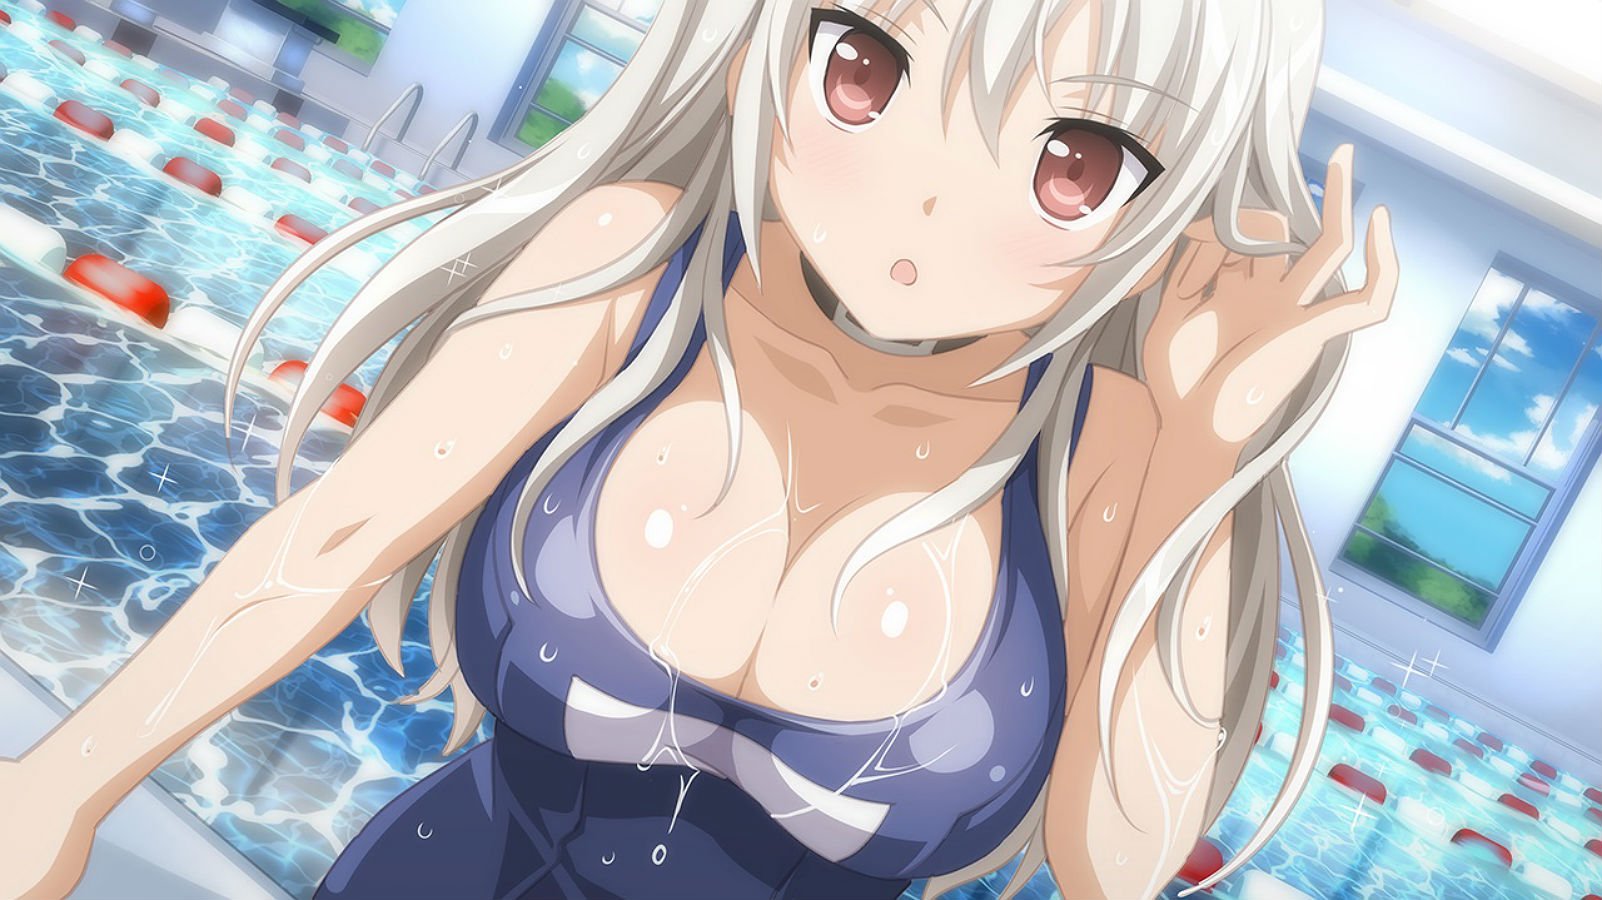 Animated Gif Of Busty Ecchi Oppai Hentai Warrior Game Babe In A Gaming Sprite From Trollbusters